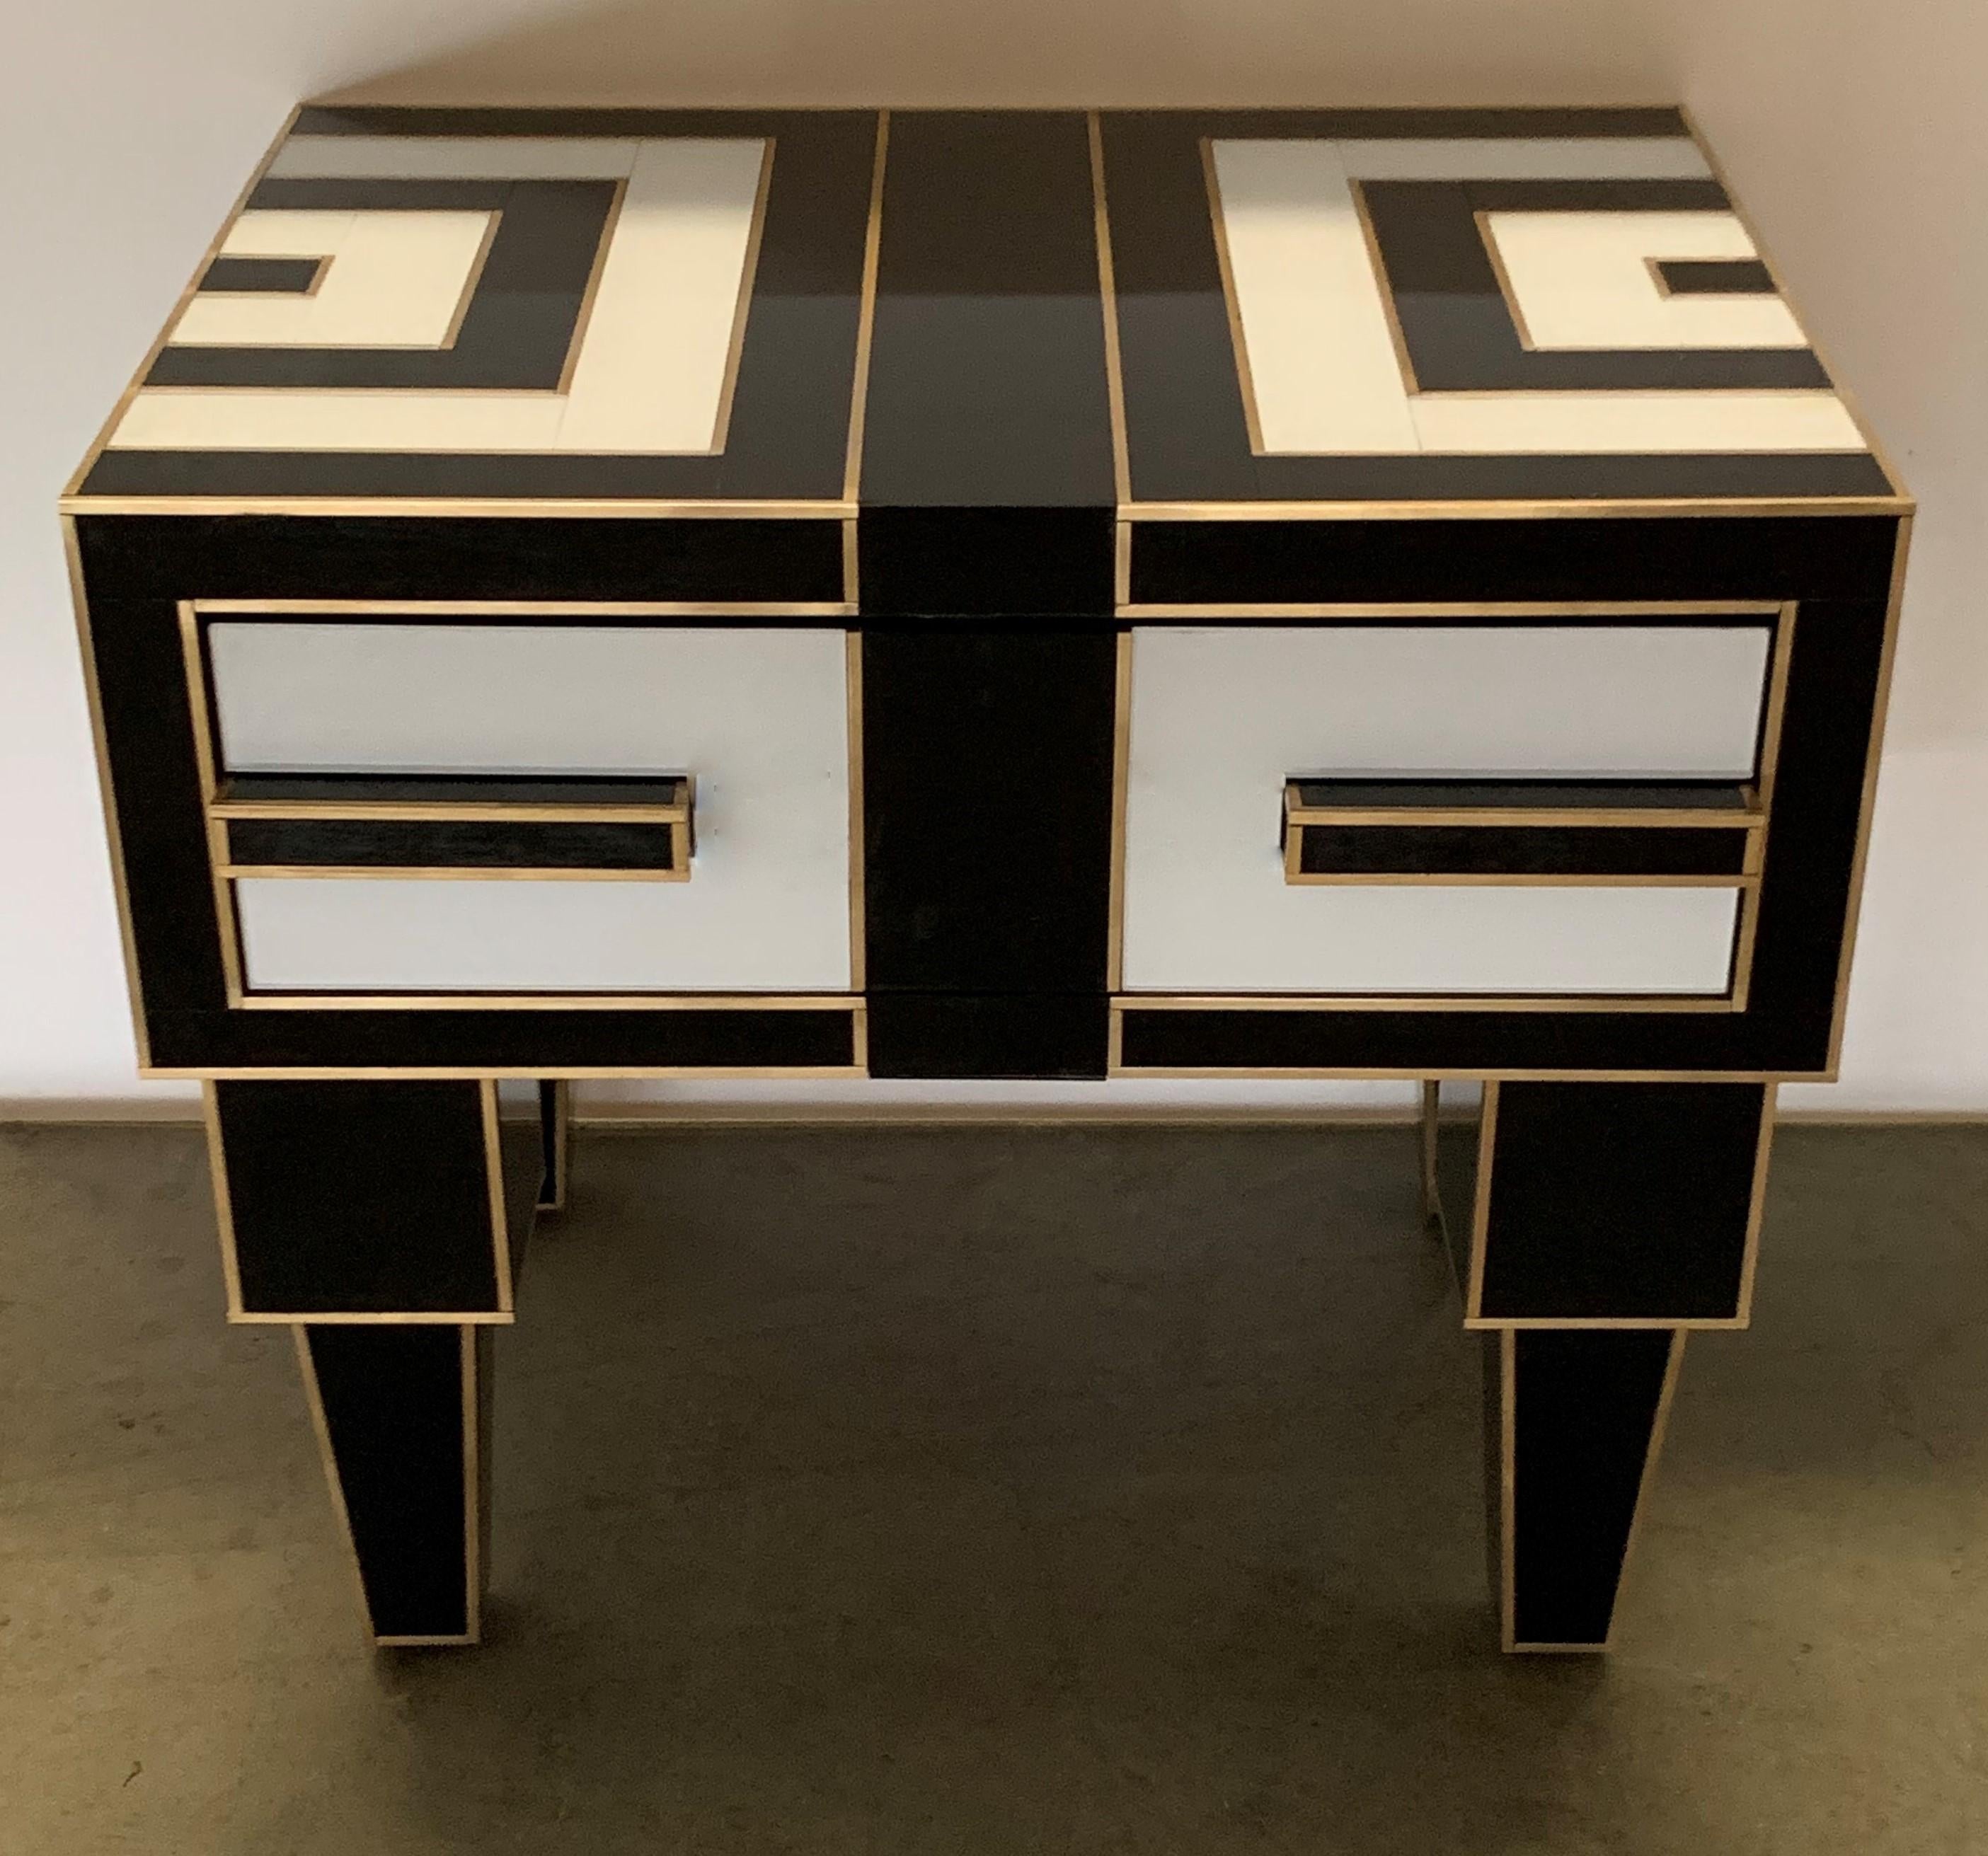 Pair of Mirrored and Brass Nightstands with One-Drawer in Black and White 1